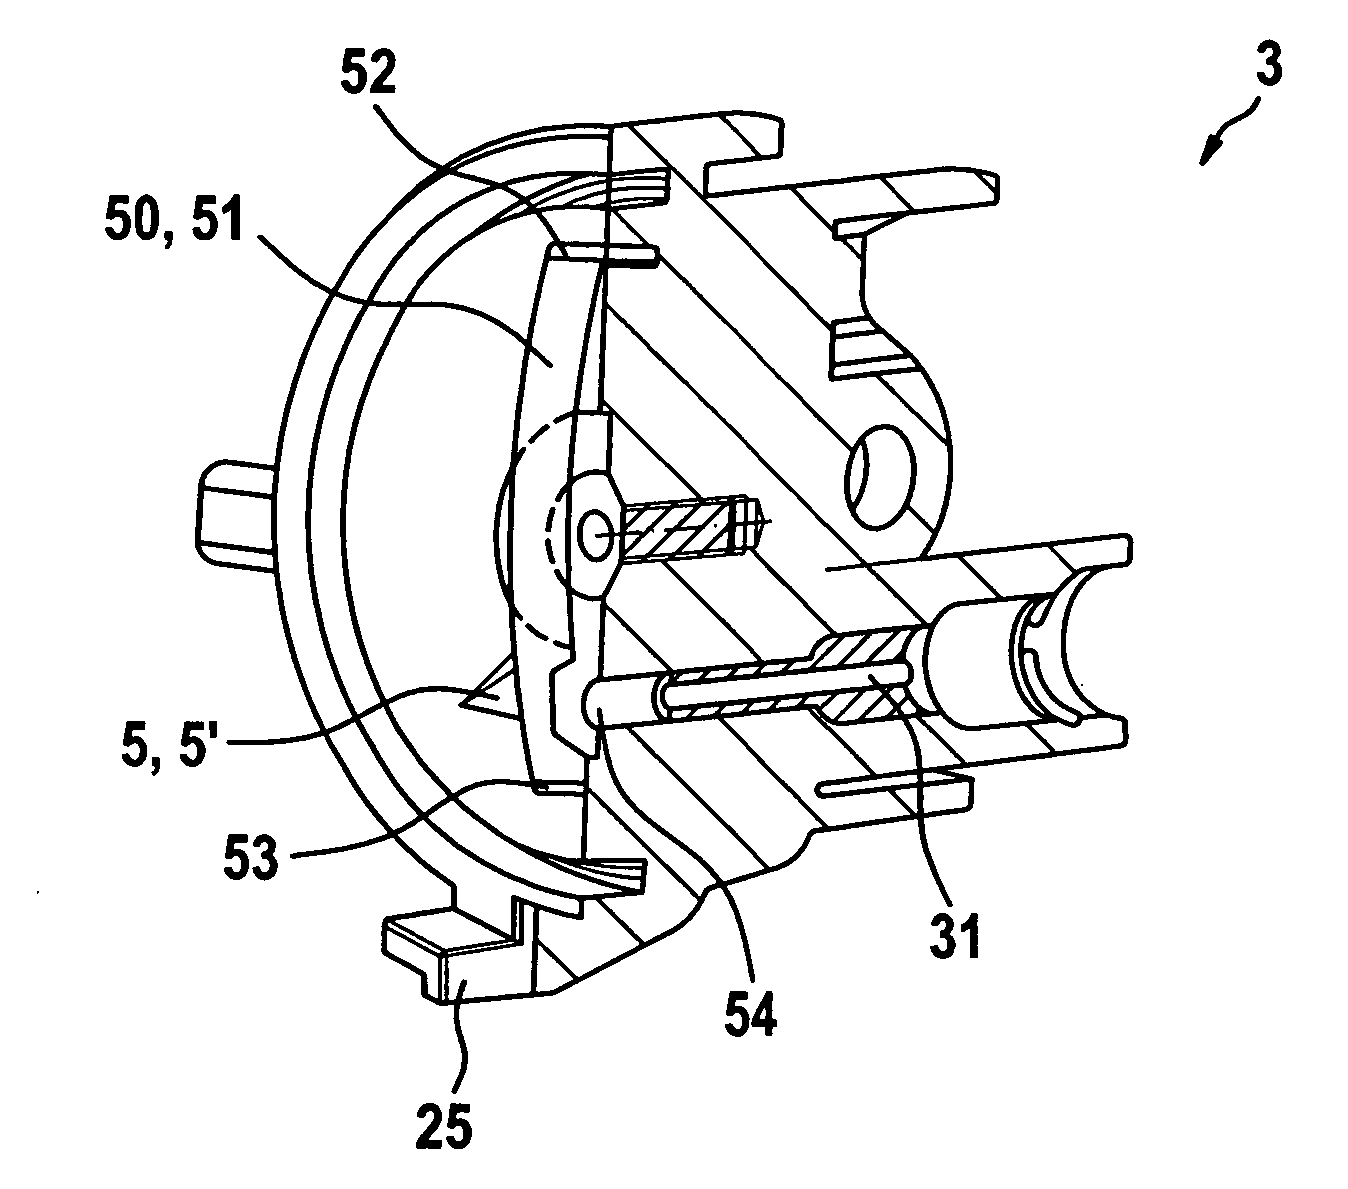 Brewing apparatus for extracting a portion capsule